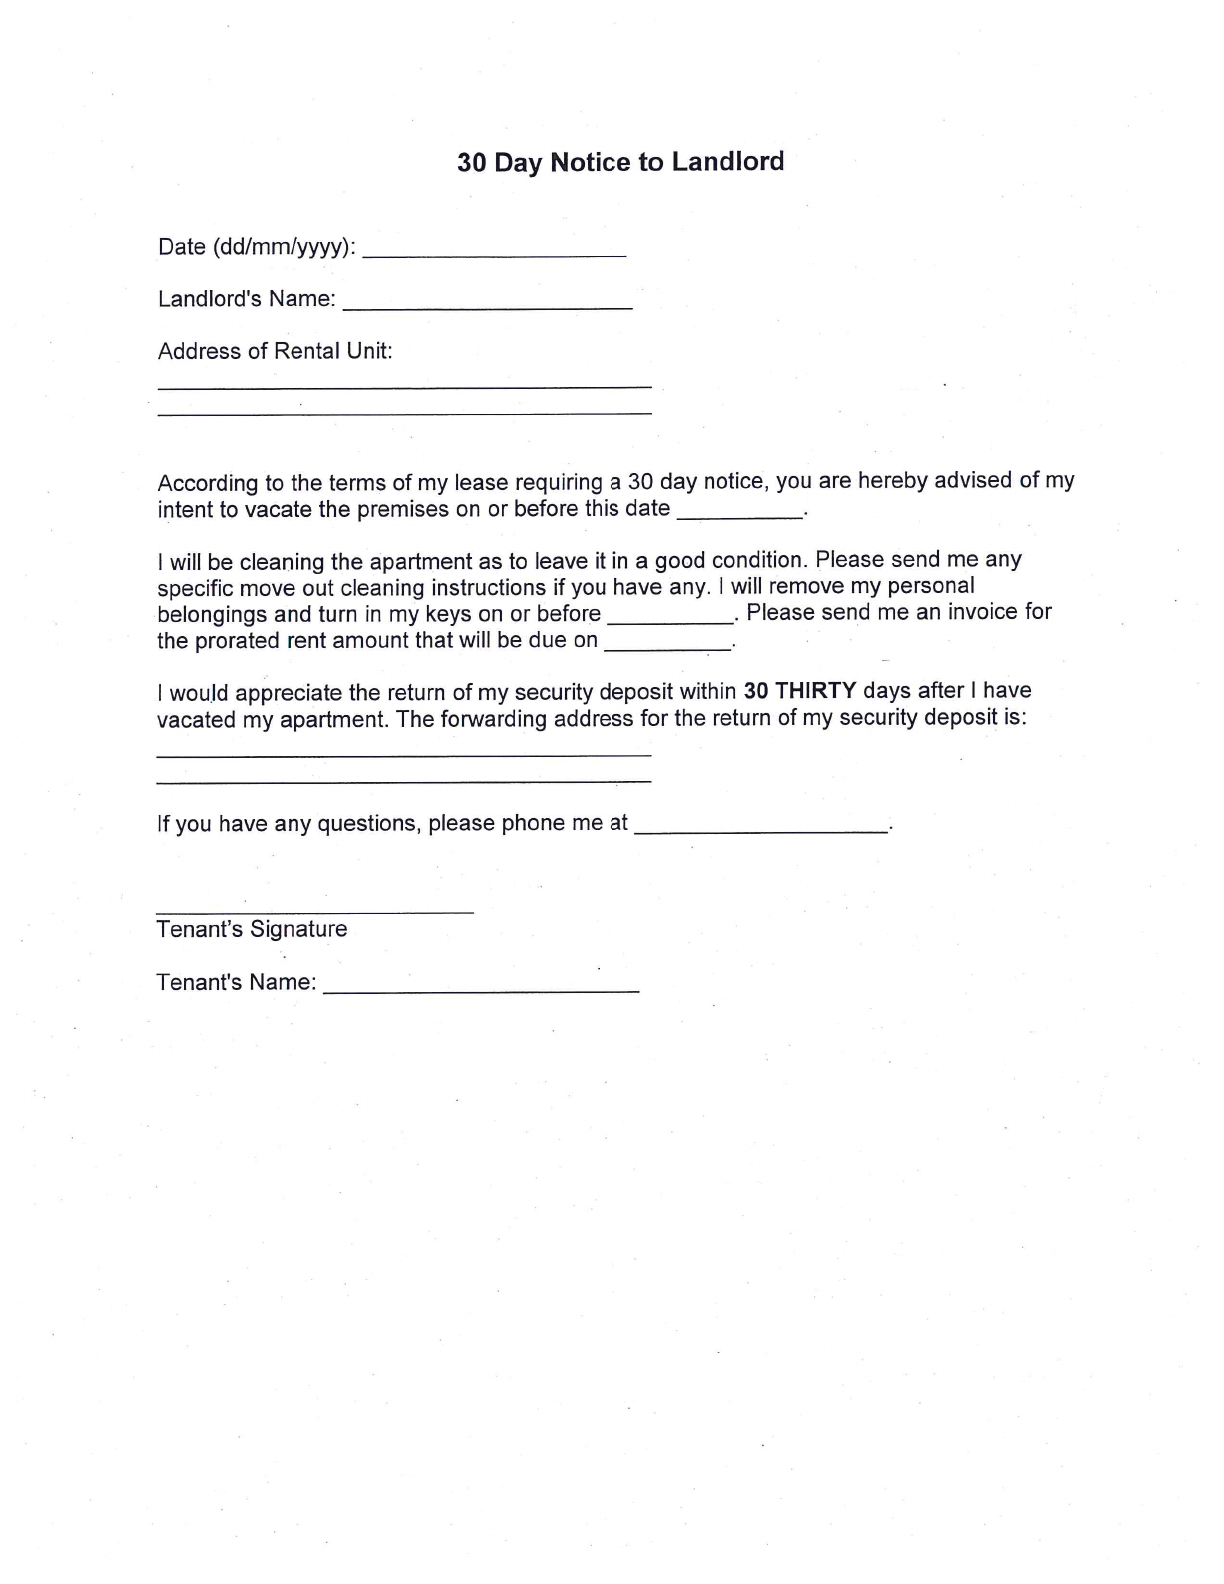 Example Of 30 Day Notice Letter To Landlord Sample Templates Images 